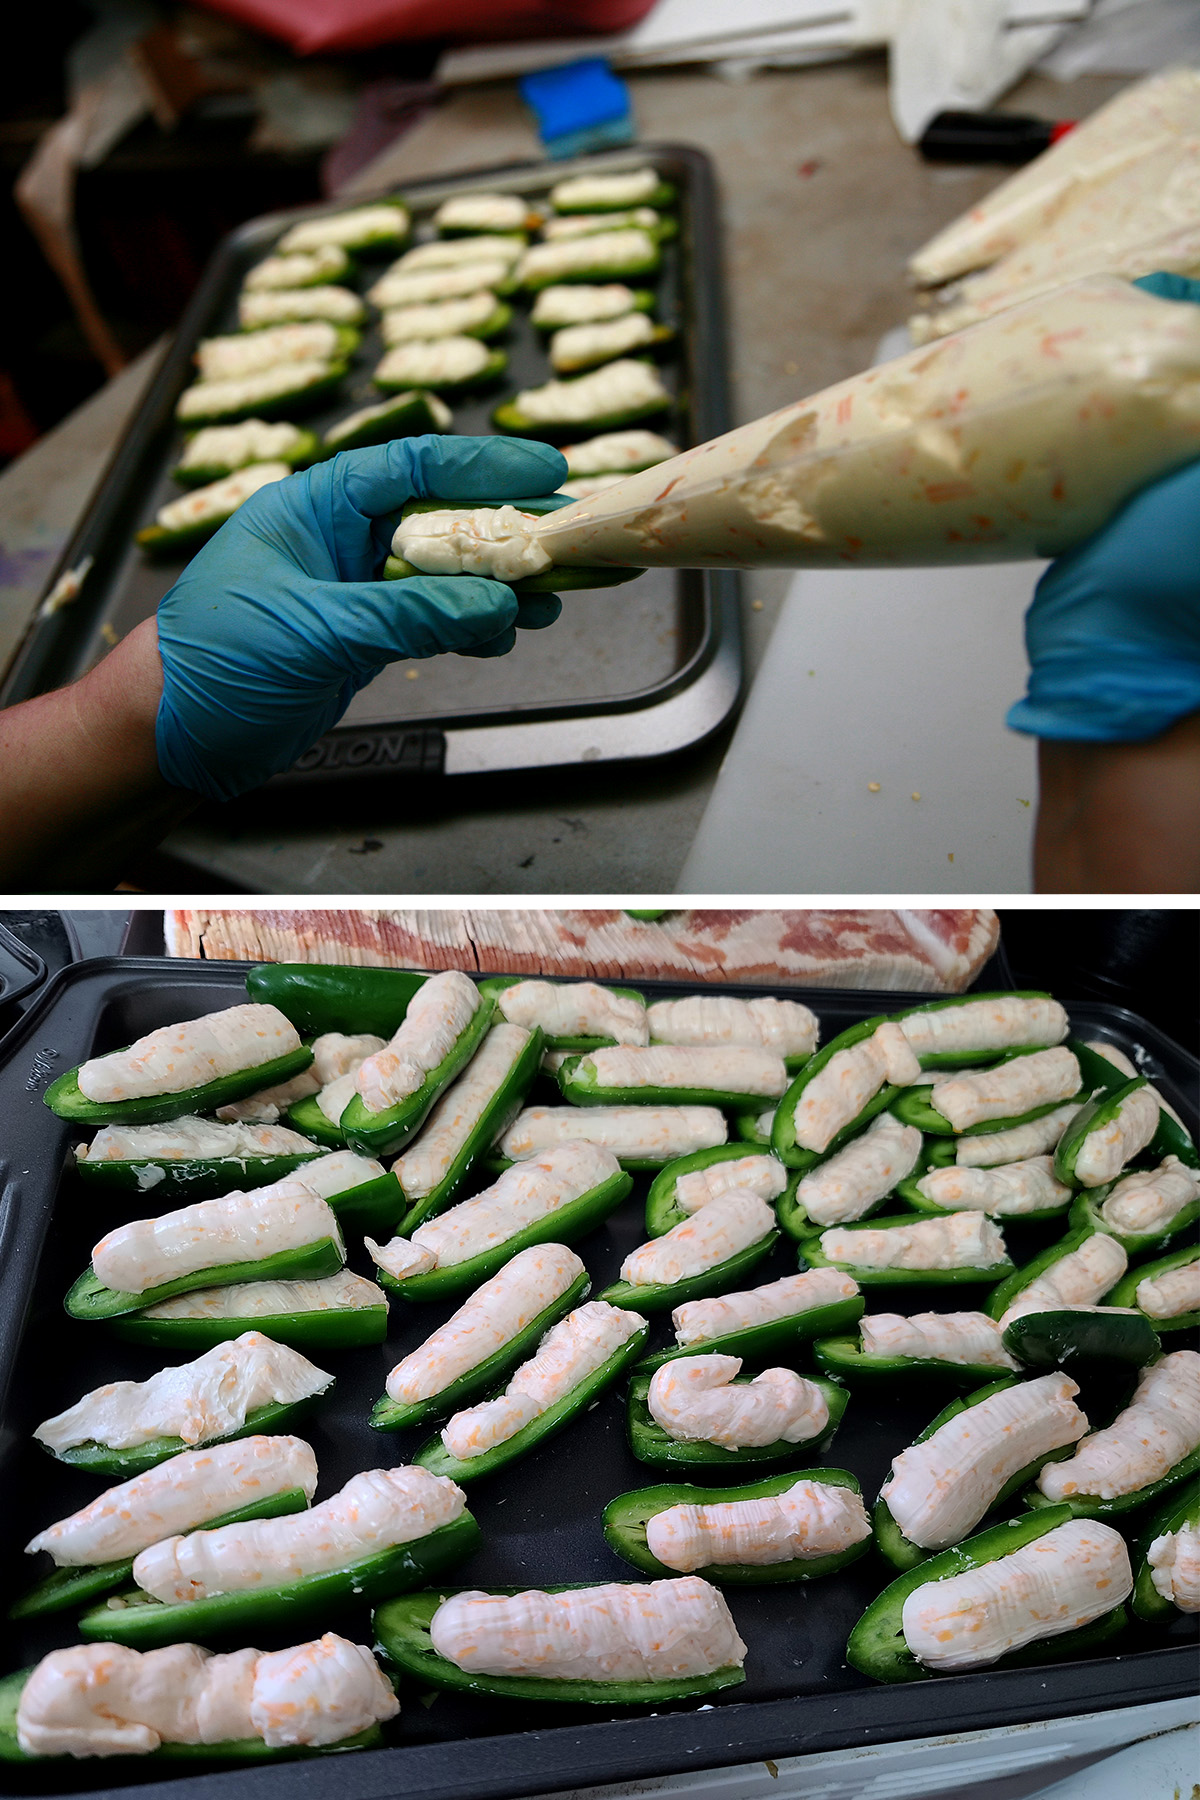 A 2 part image showing the cheese filling being piped into jalapeno halves.